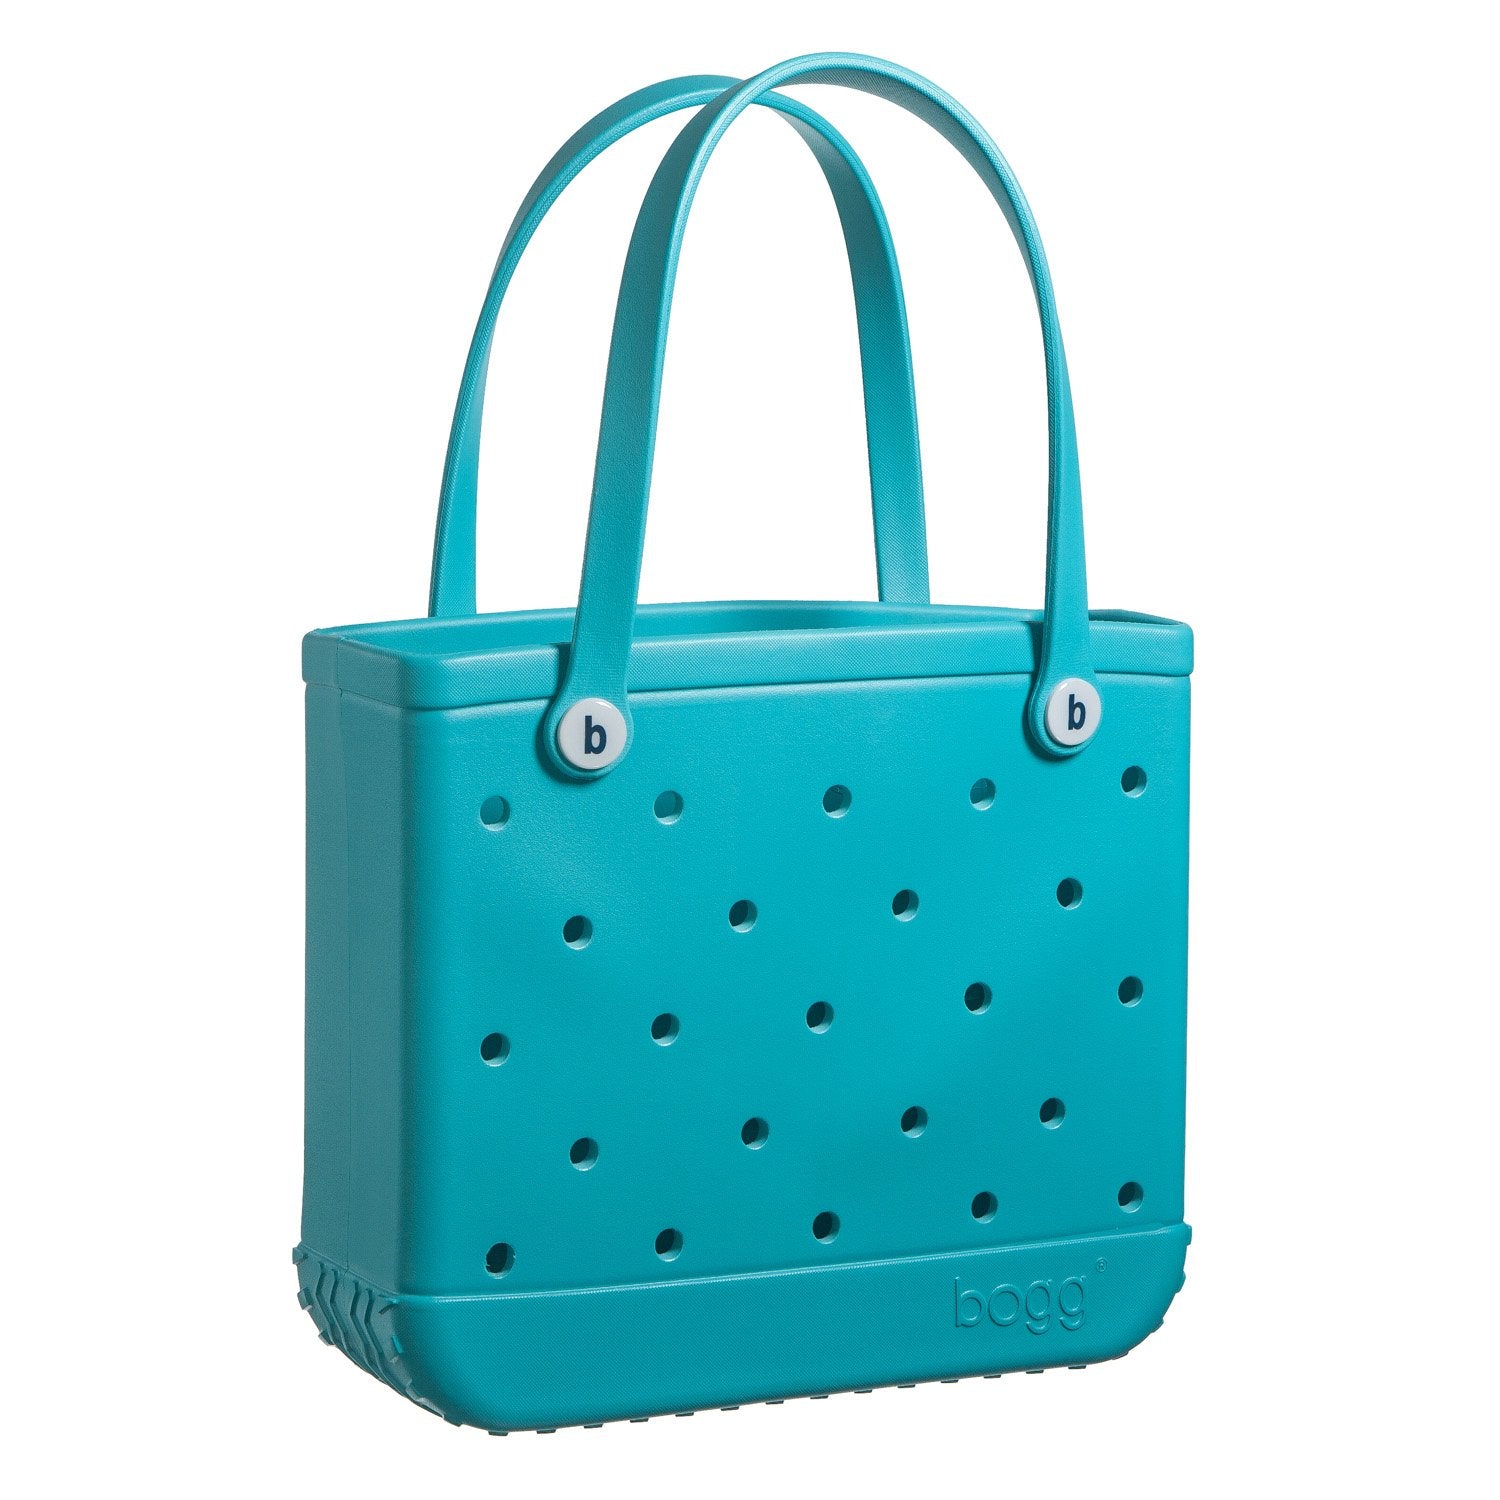 Baby Bogg Bag | Turquoise and Caicos